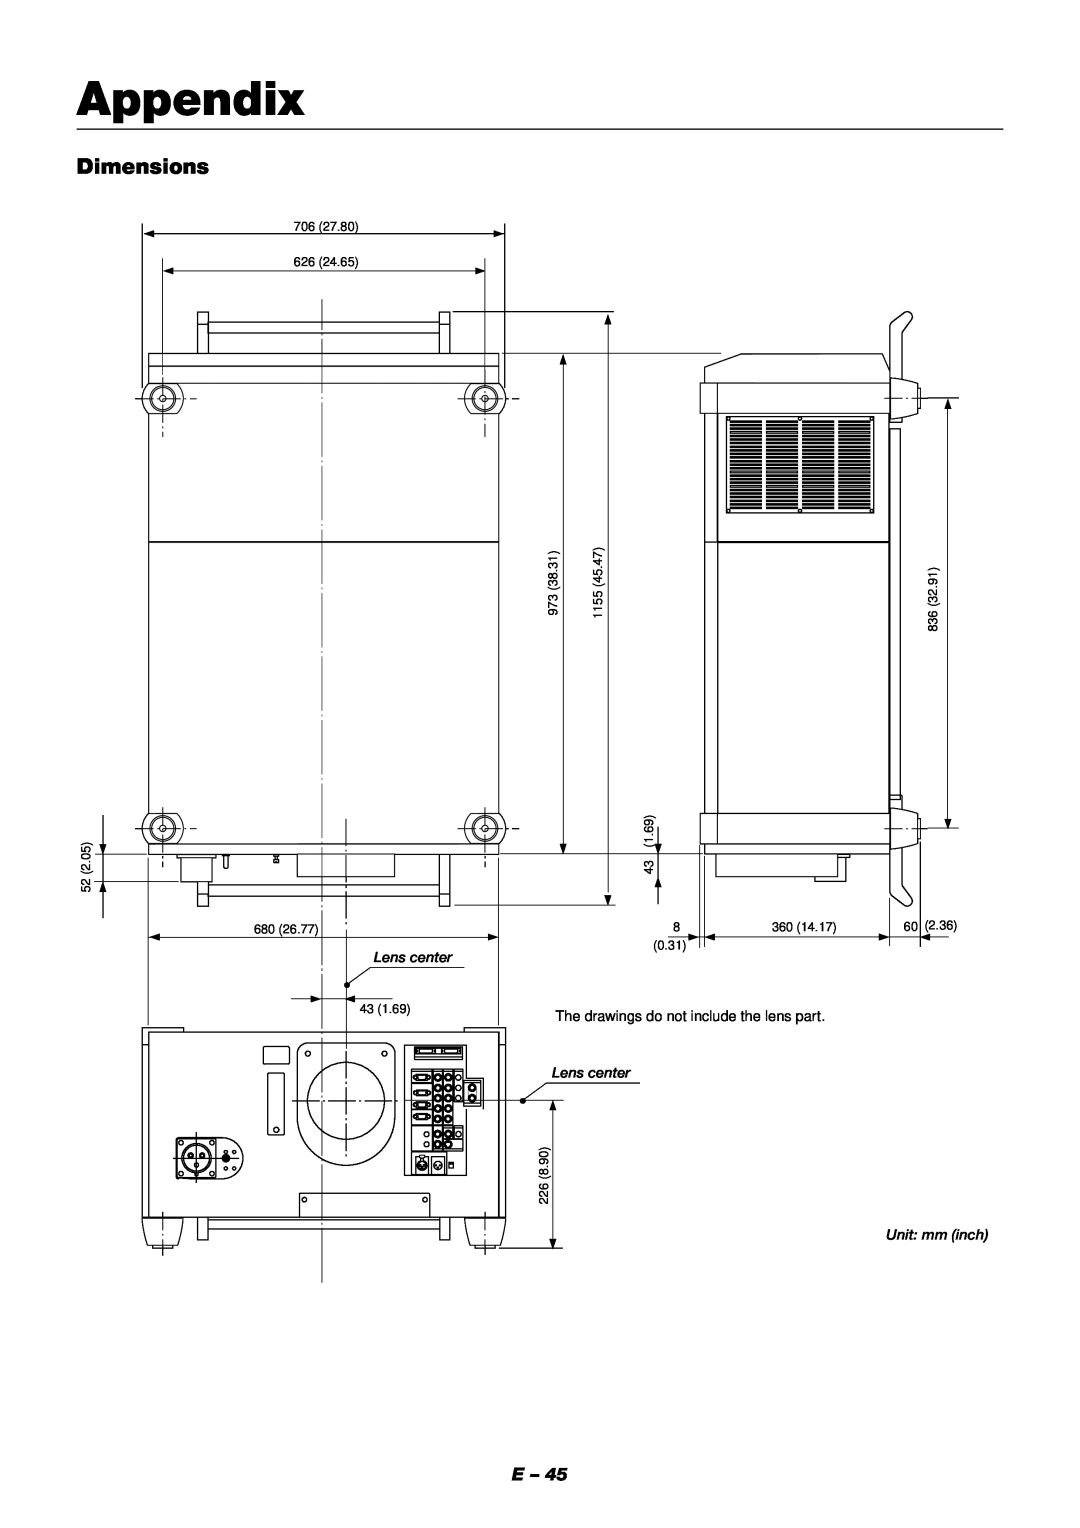 NEC XT9000 user manual Appendix, Dimensions, The drawings do not include the lens part 